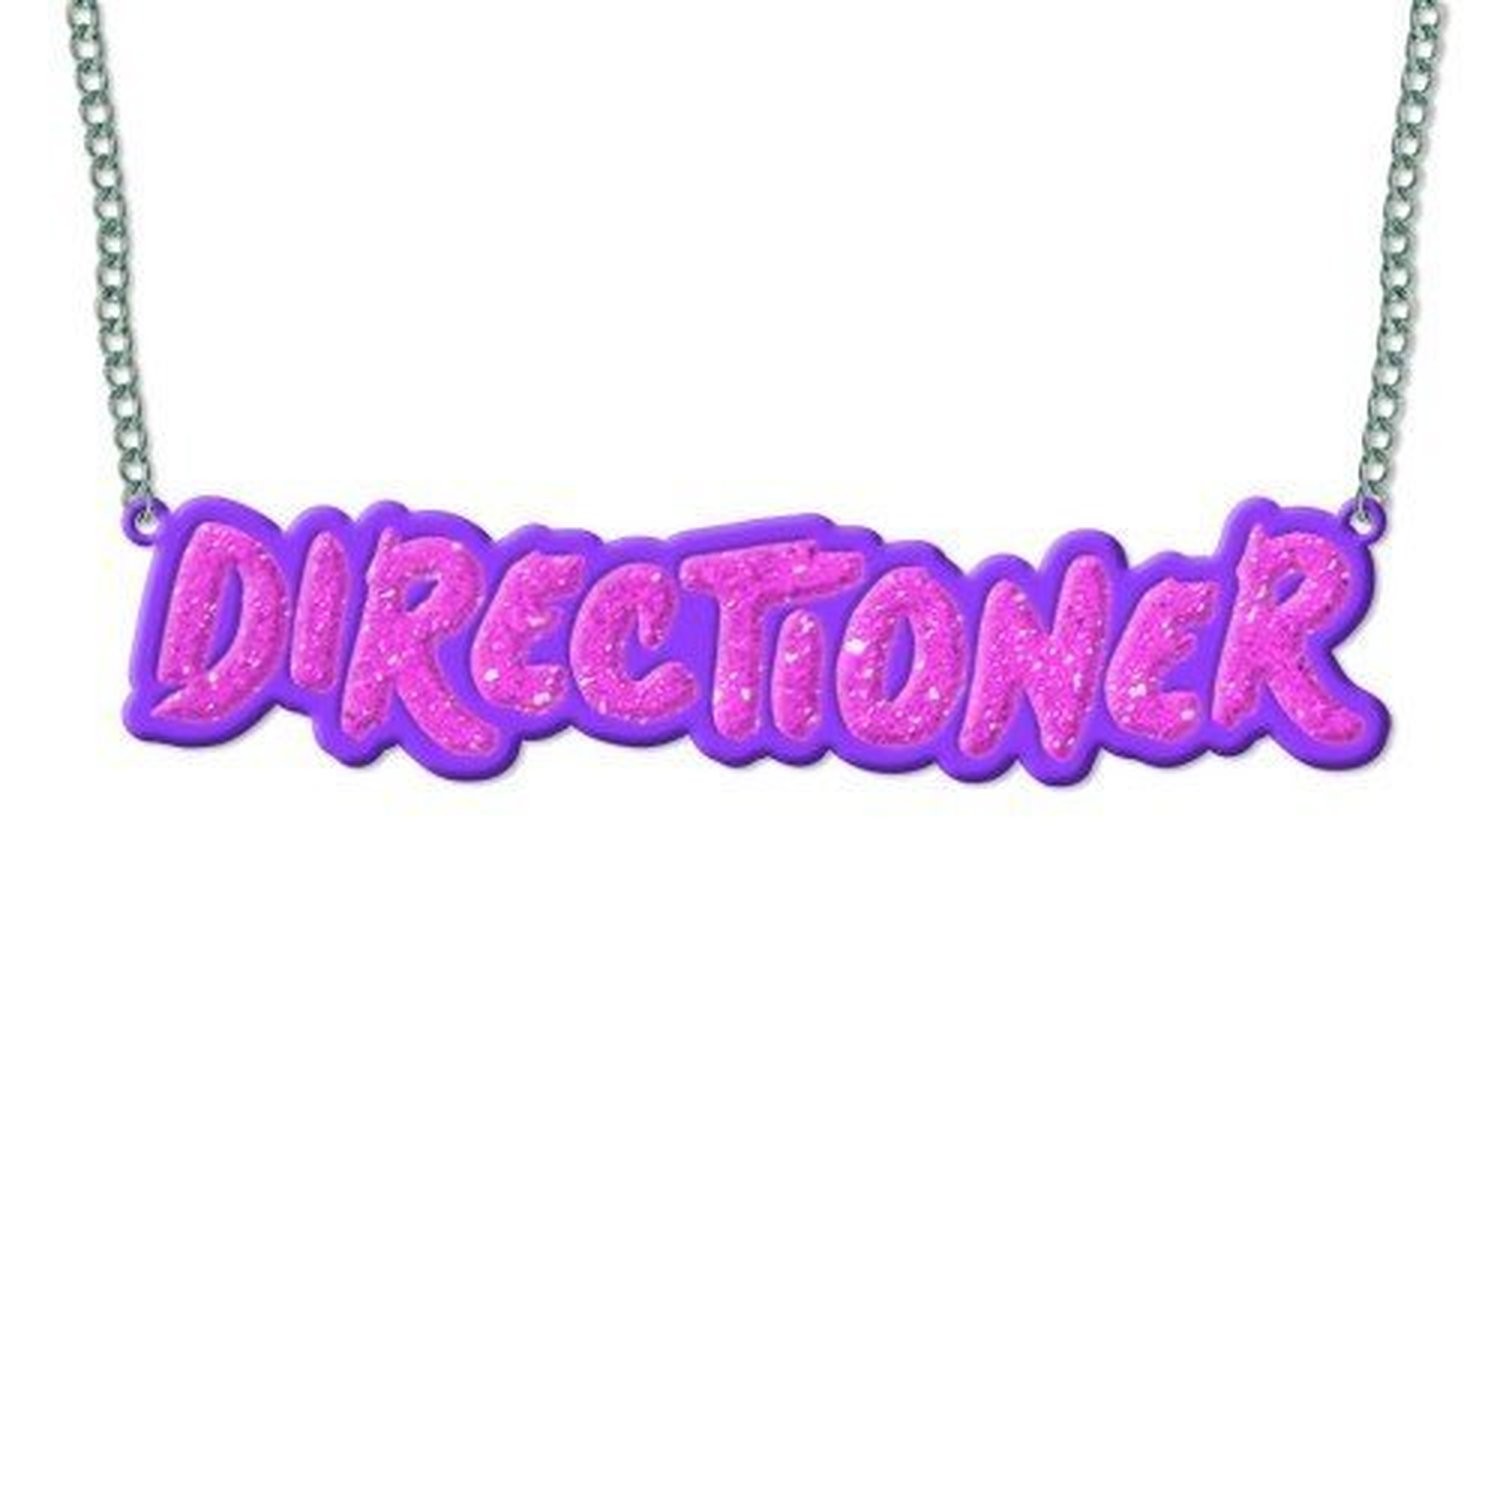 1D One Direction Pink Name Band Logo Necklace Chain Pendant Official Gift Idea